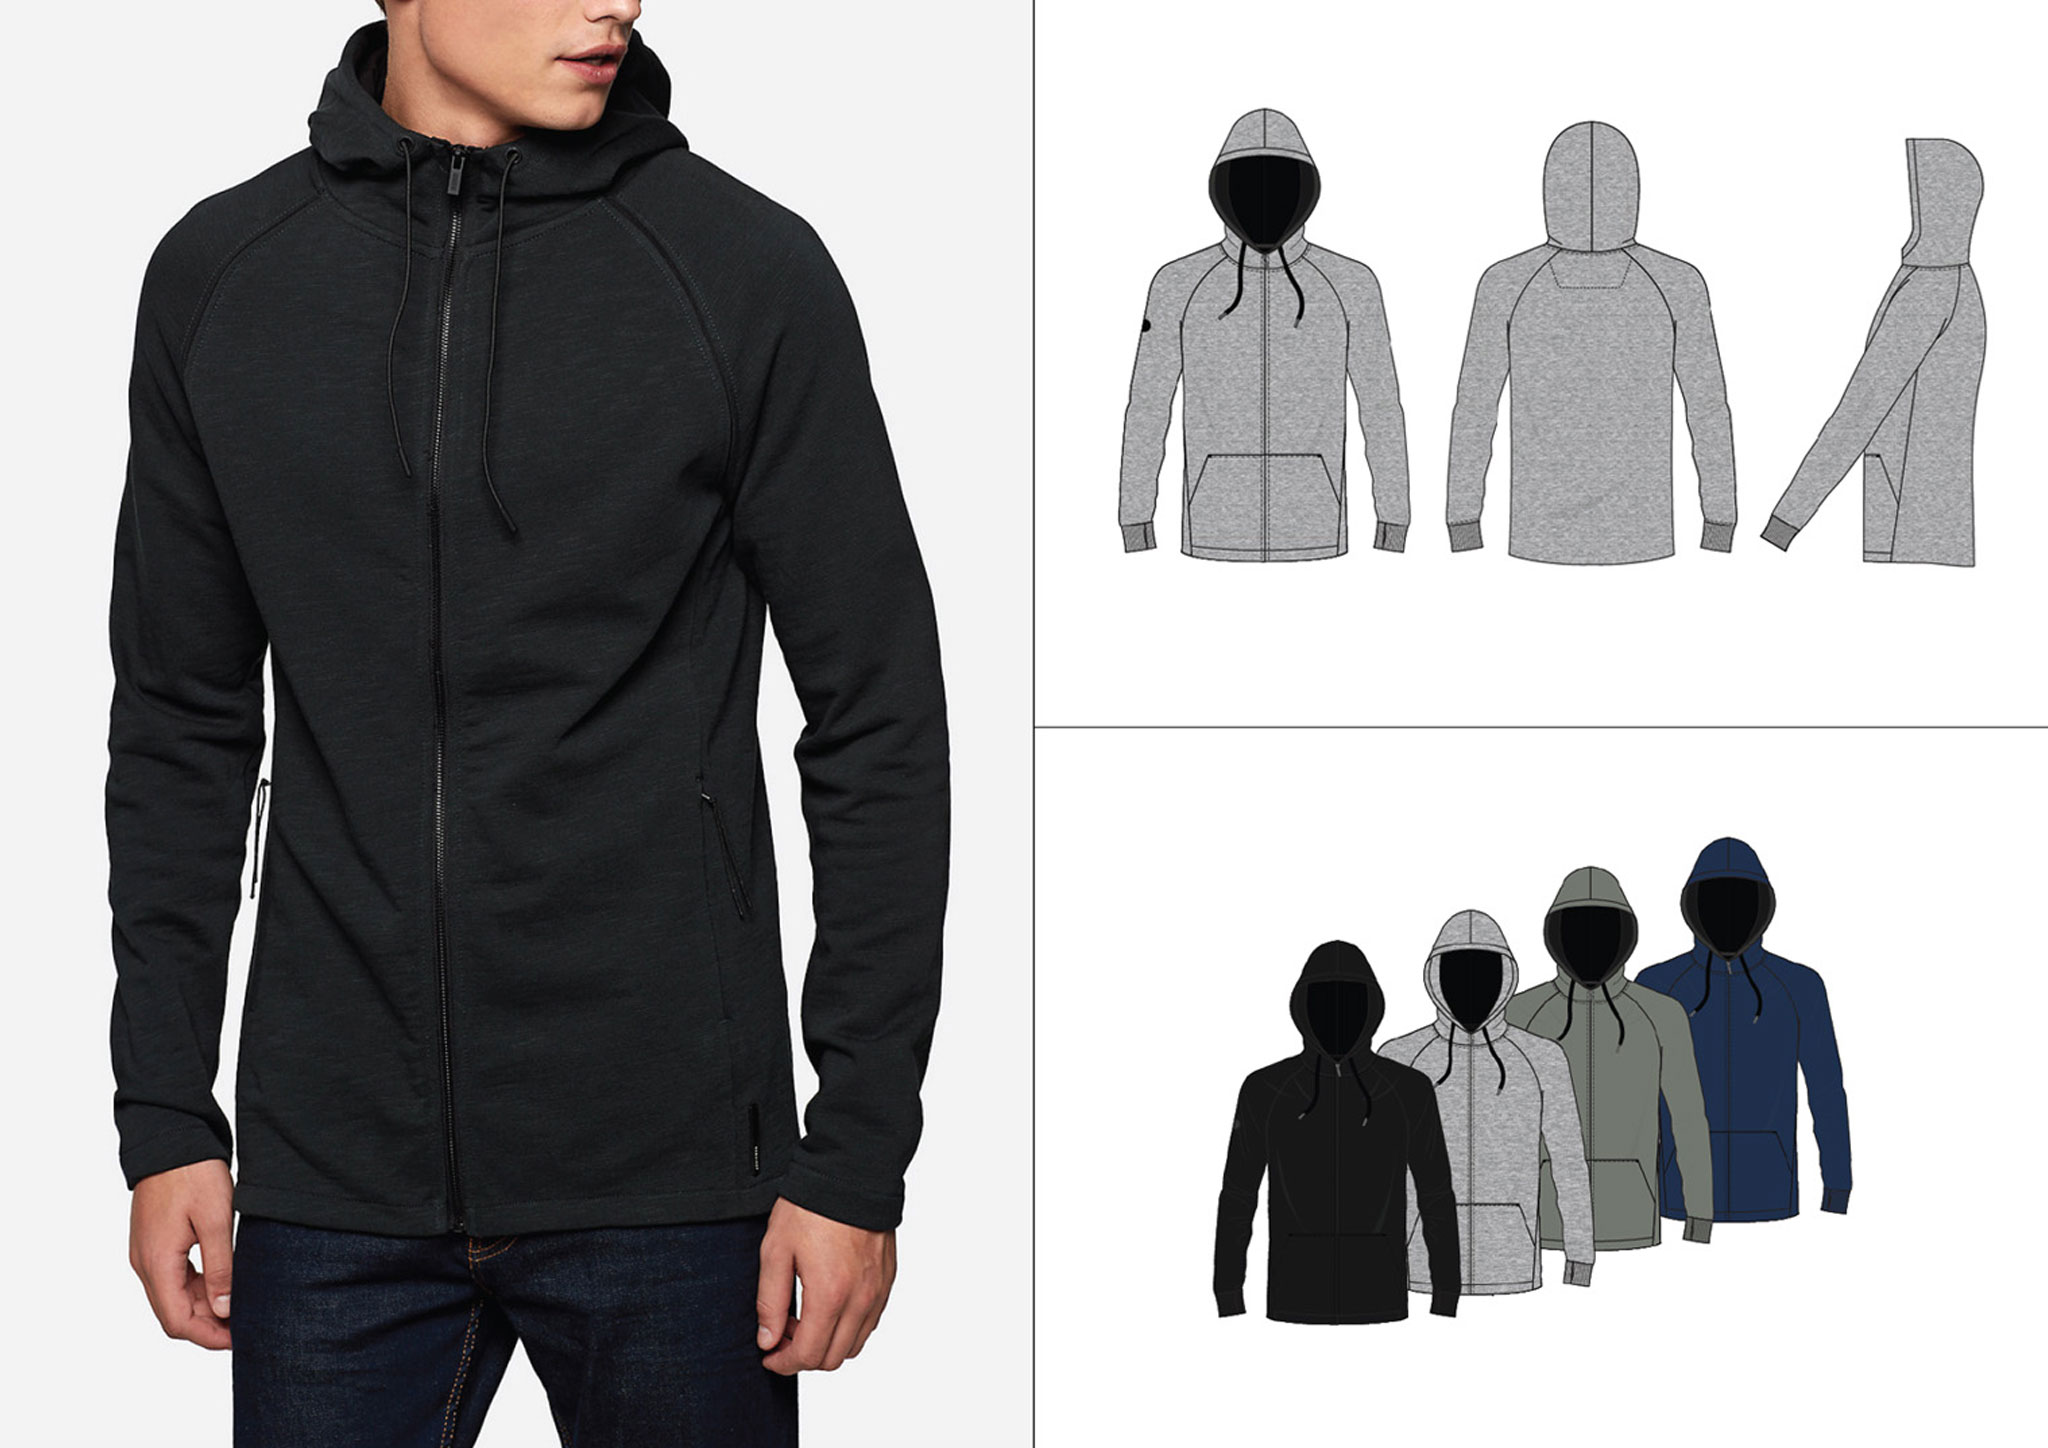 A man wearing a black slim fit hoodie and fashion design drawings made in Adobe Illustrator